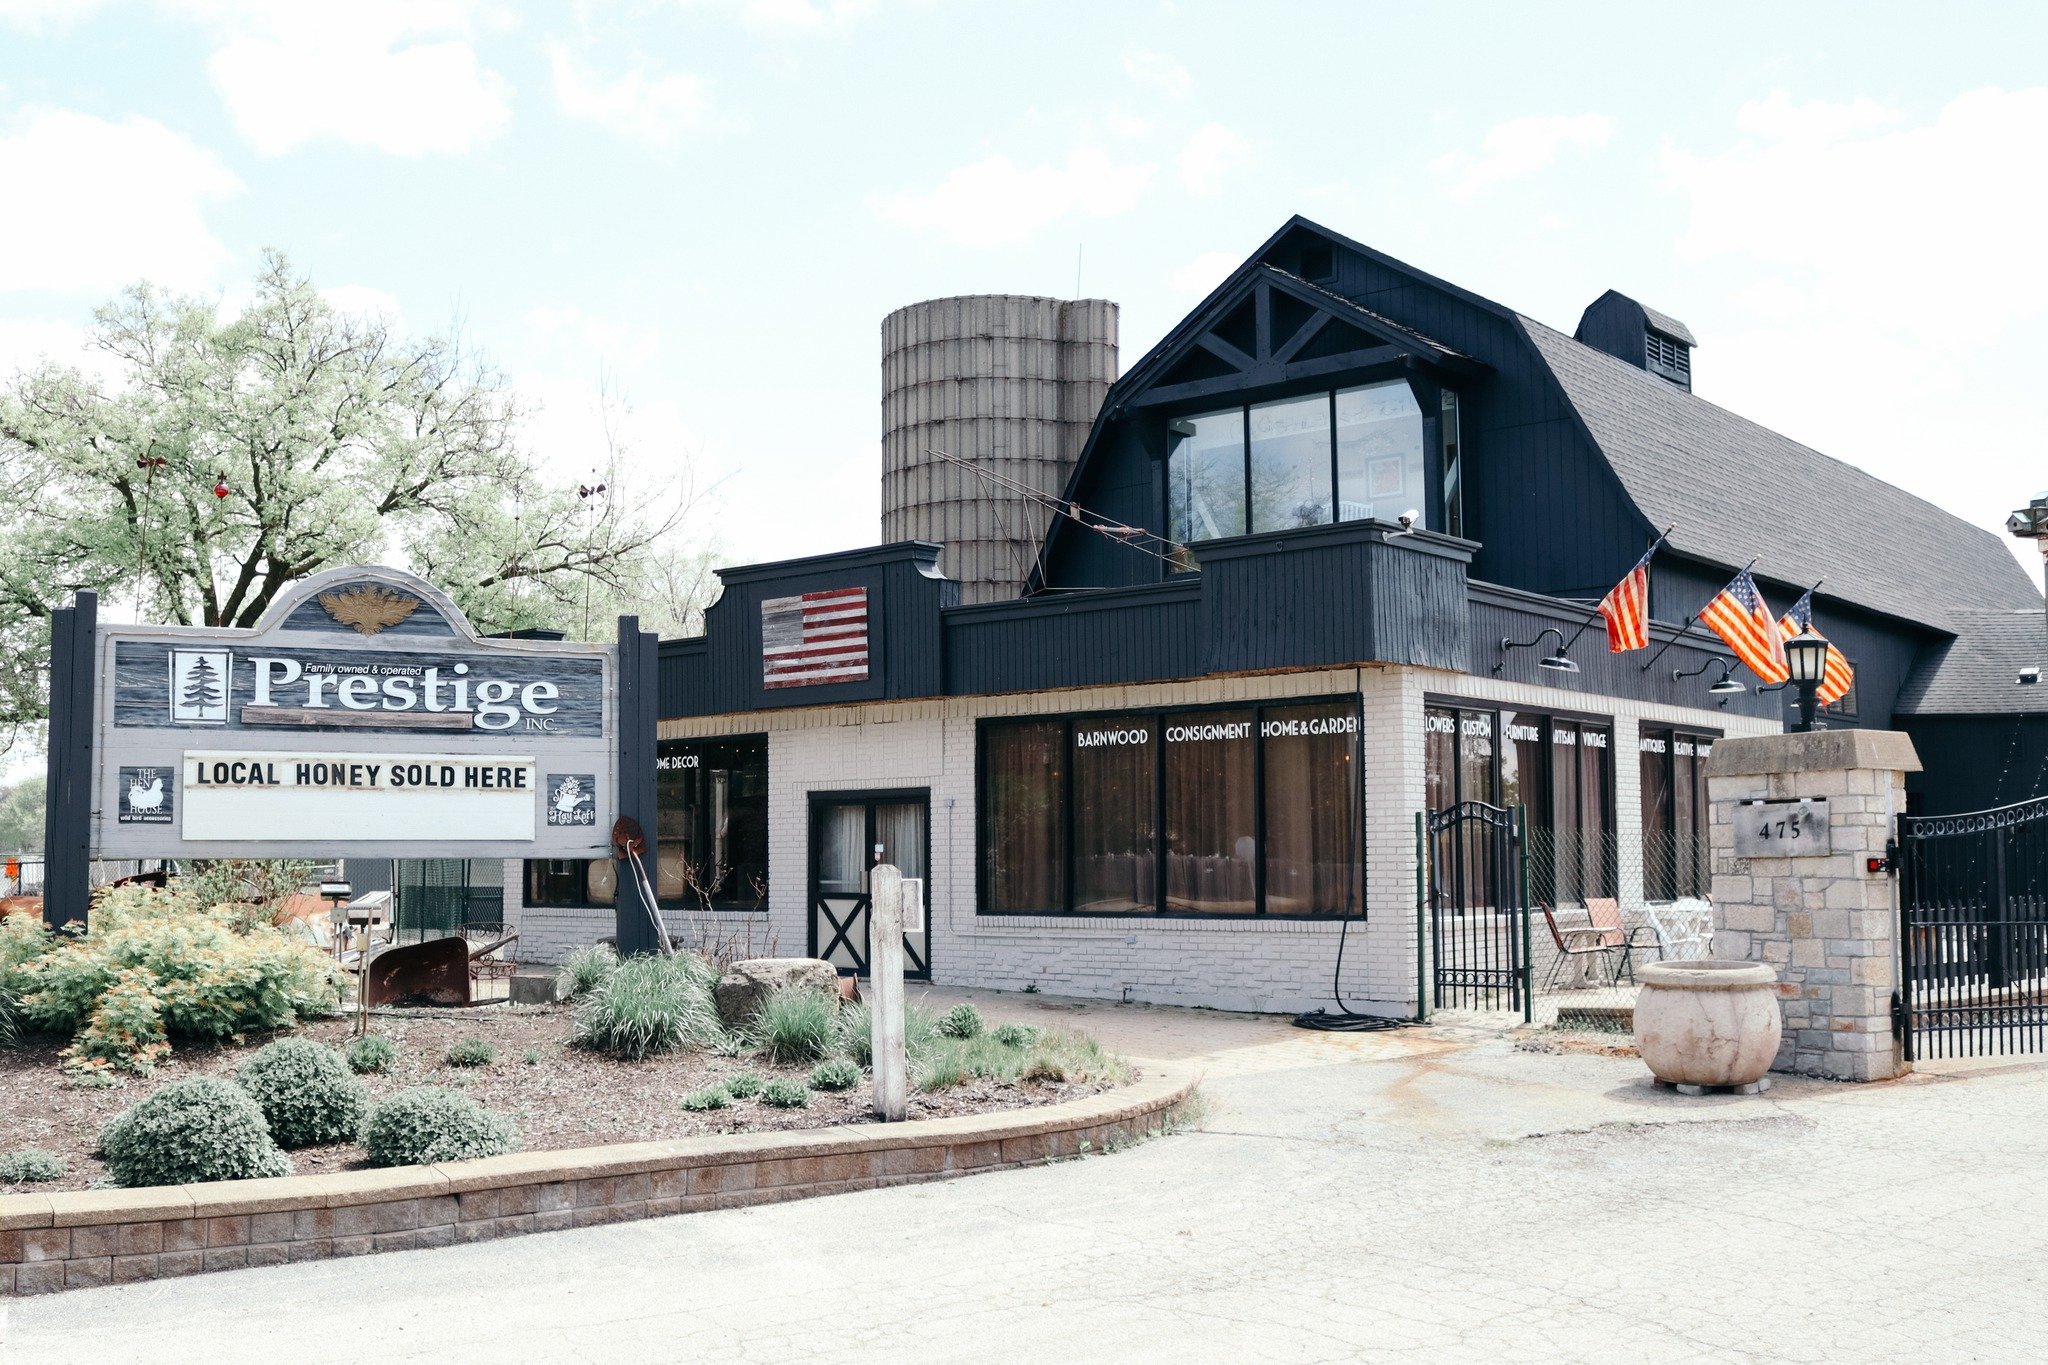 SPEND A DAY AT PRESTIGE!

We are conveniently located on the south side of Army Trail Road, just 1/2 mile east of Bartlett High School. With over 90 on-site small shops, there's something for everyone. Grab a friend, stop in, and discover all we have